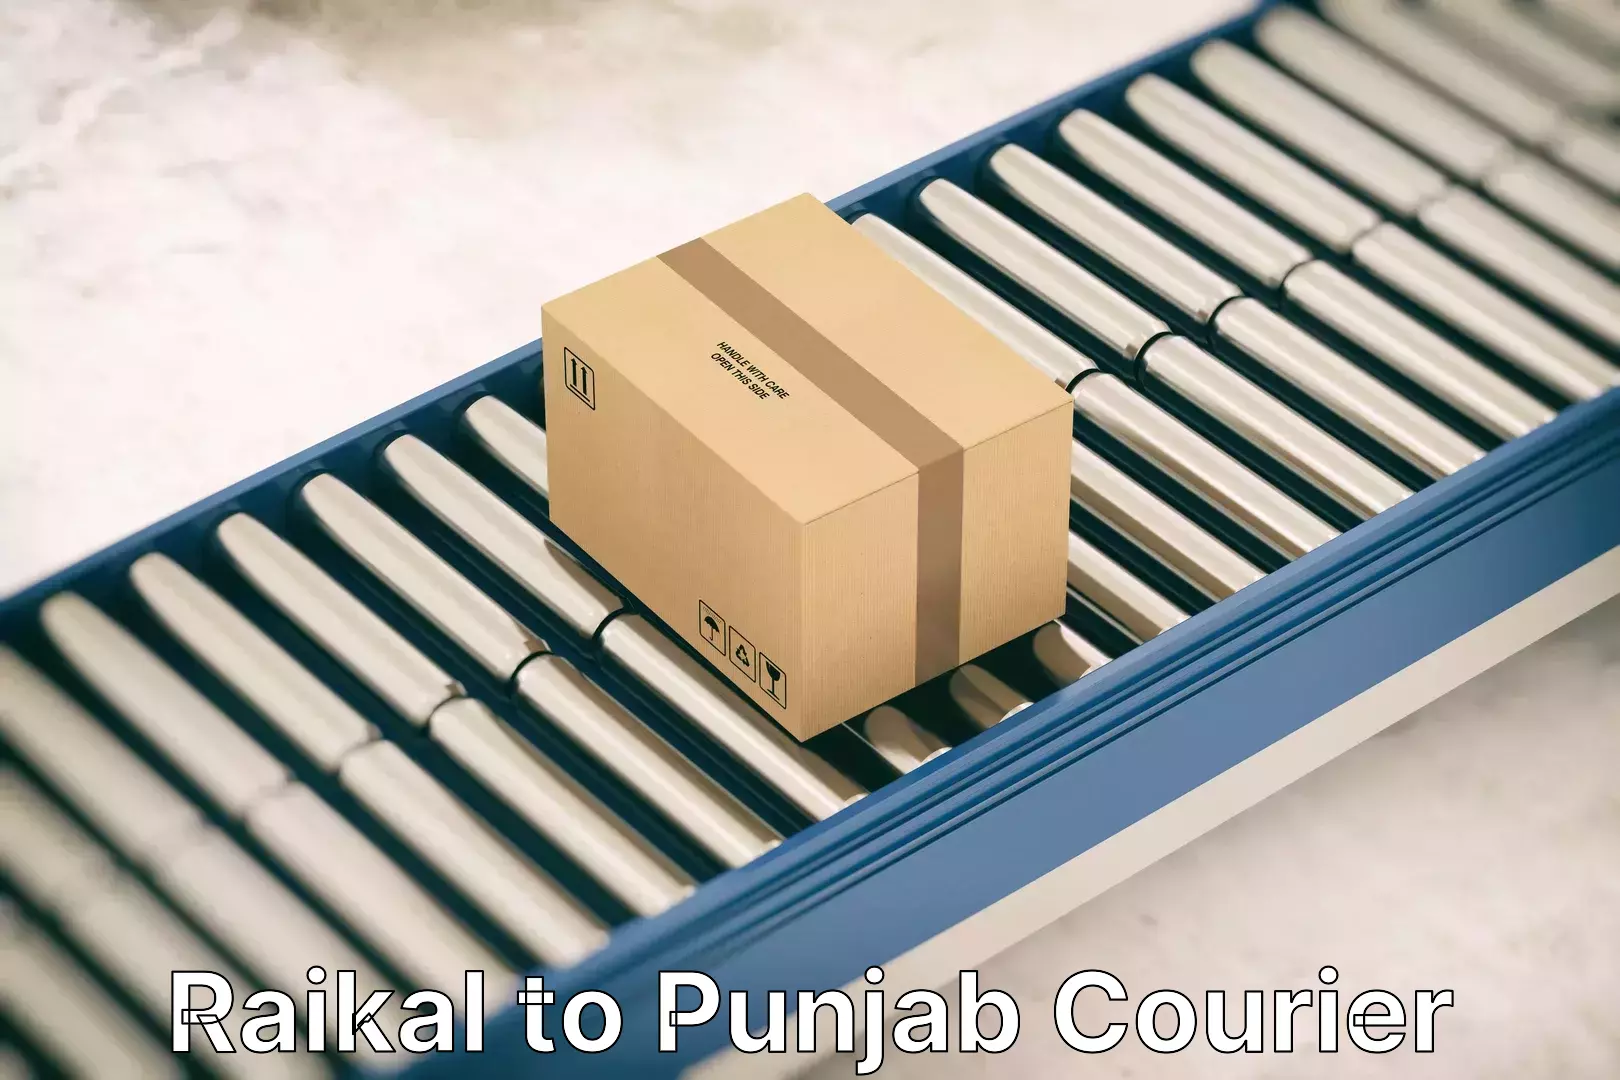 Trusted relocation services Raikal to Punjab